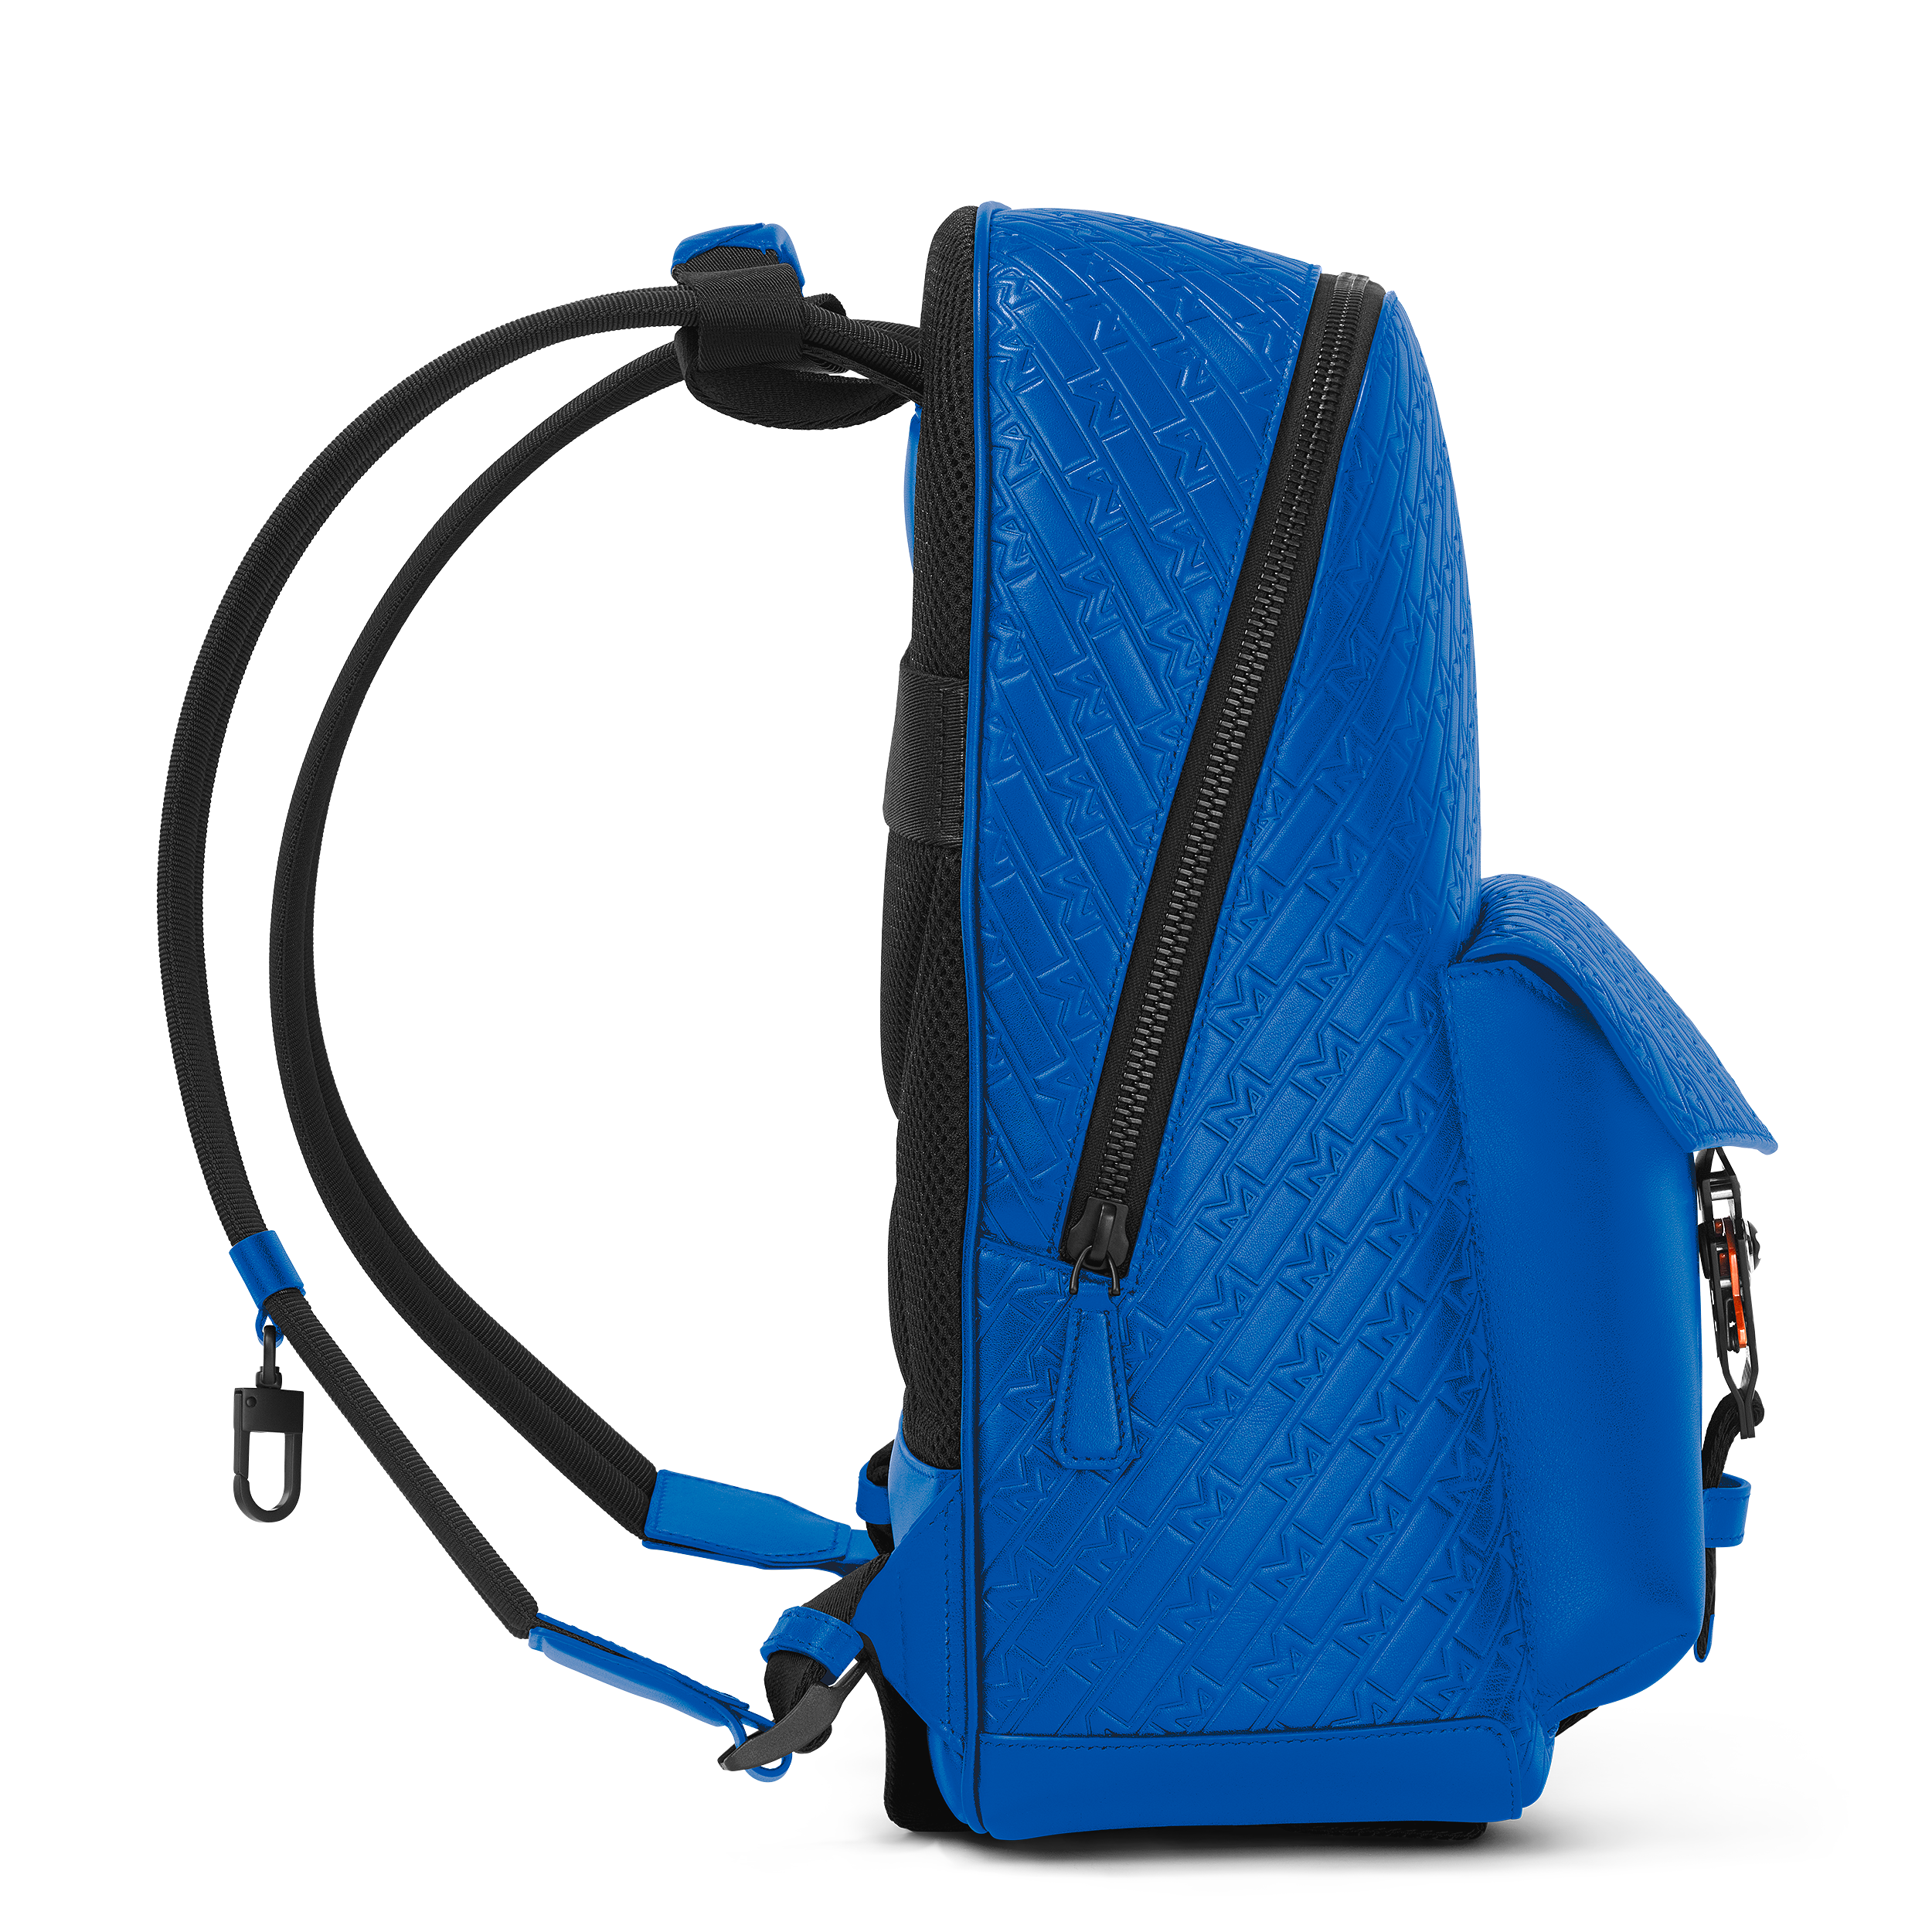 Montblanc M_Gram 4810 backpack with M LOCK 4810 buckle, image 6